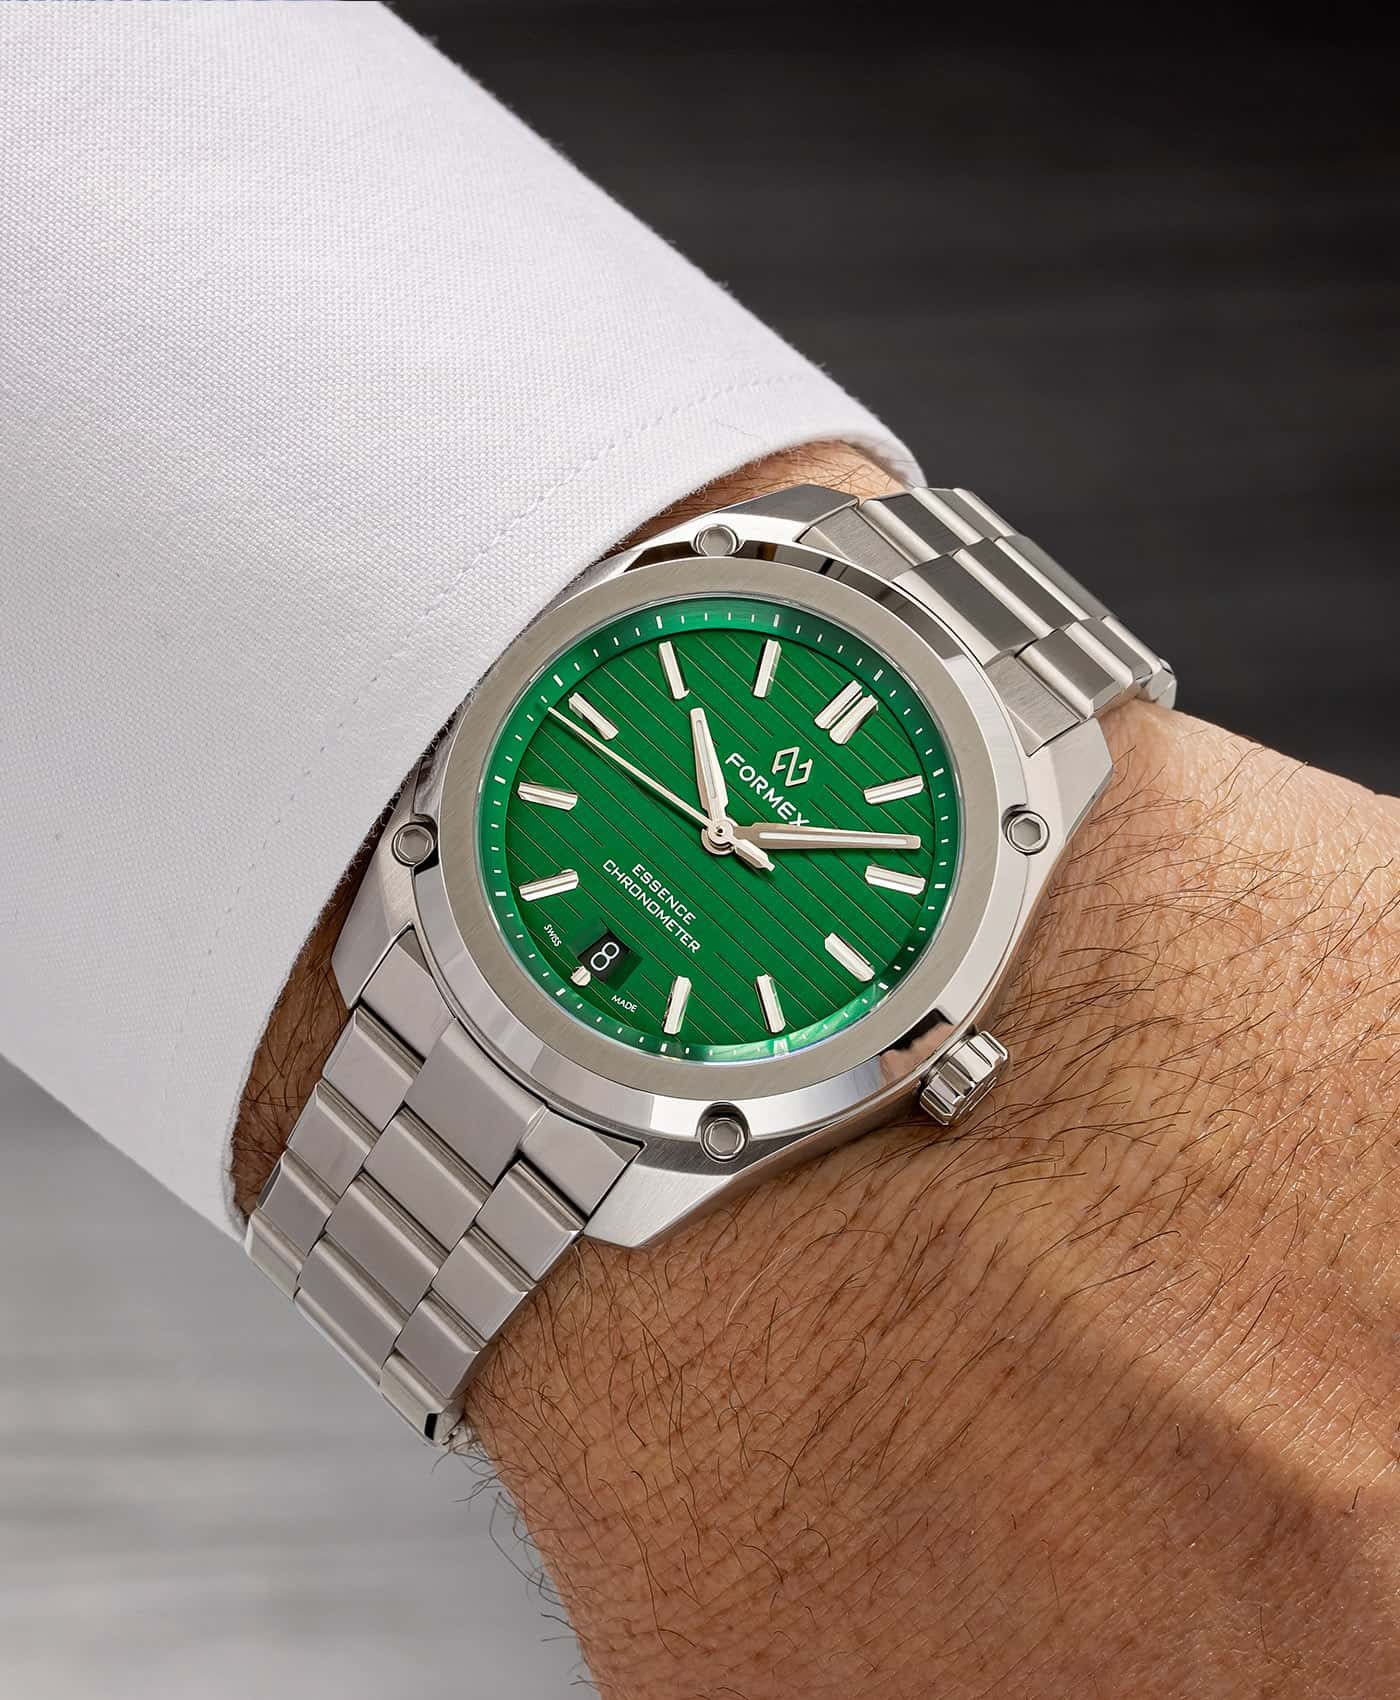 Formex - Essence FortyThree - Automatic Chronometer Green dial - wrist shot